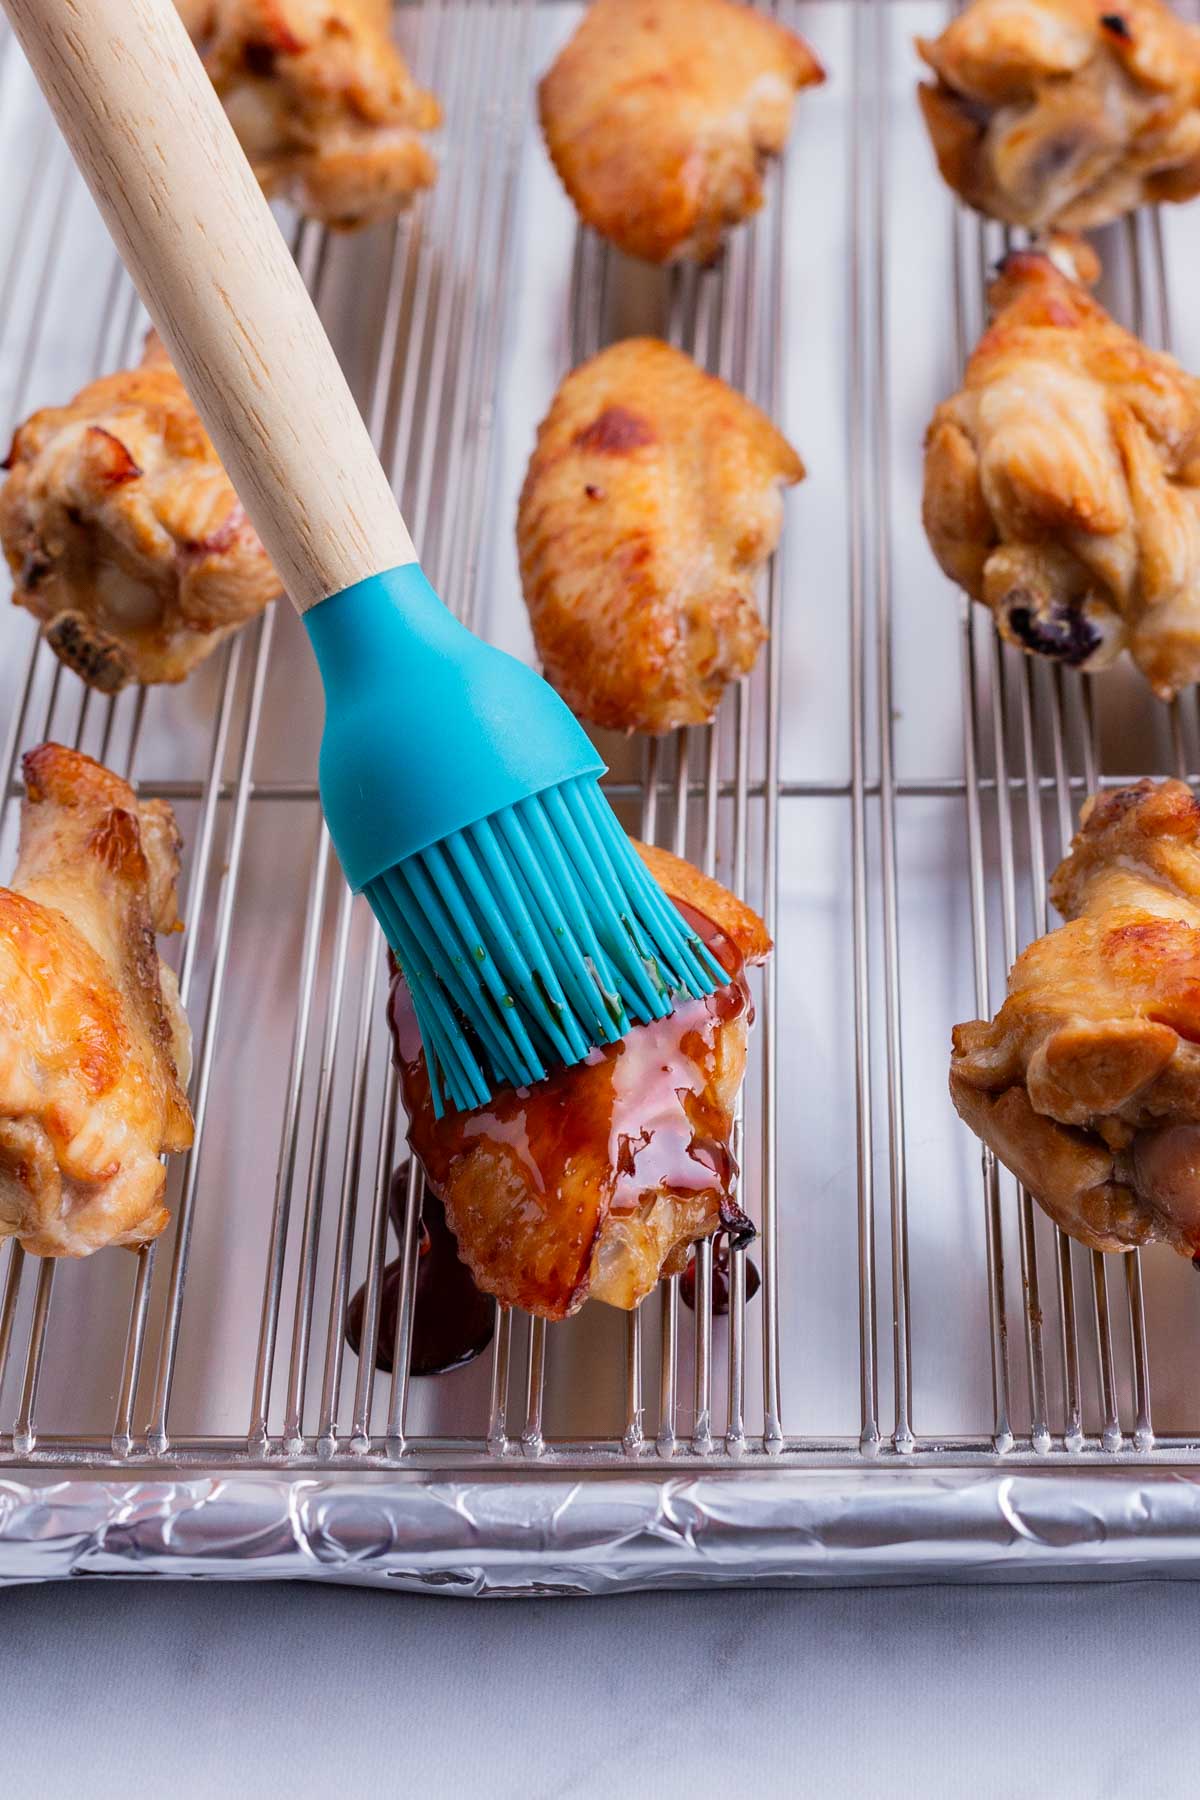 Chicken wings are basted with extra sauce before finishing.